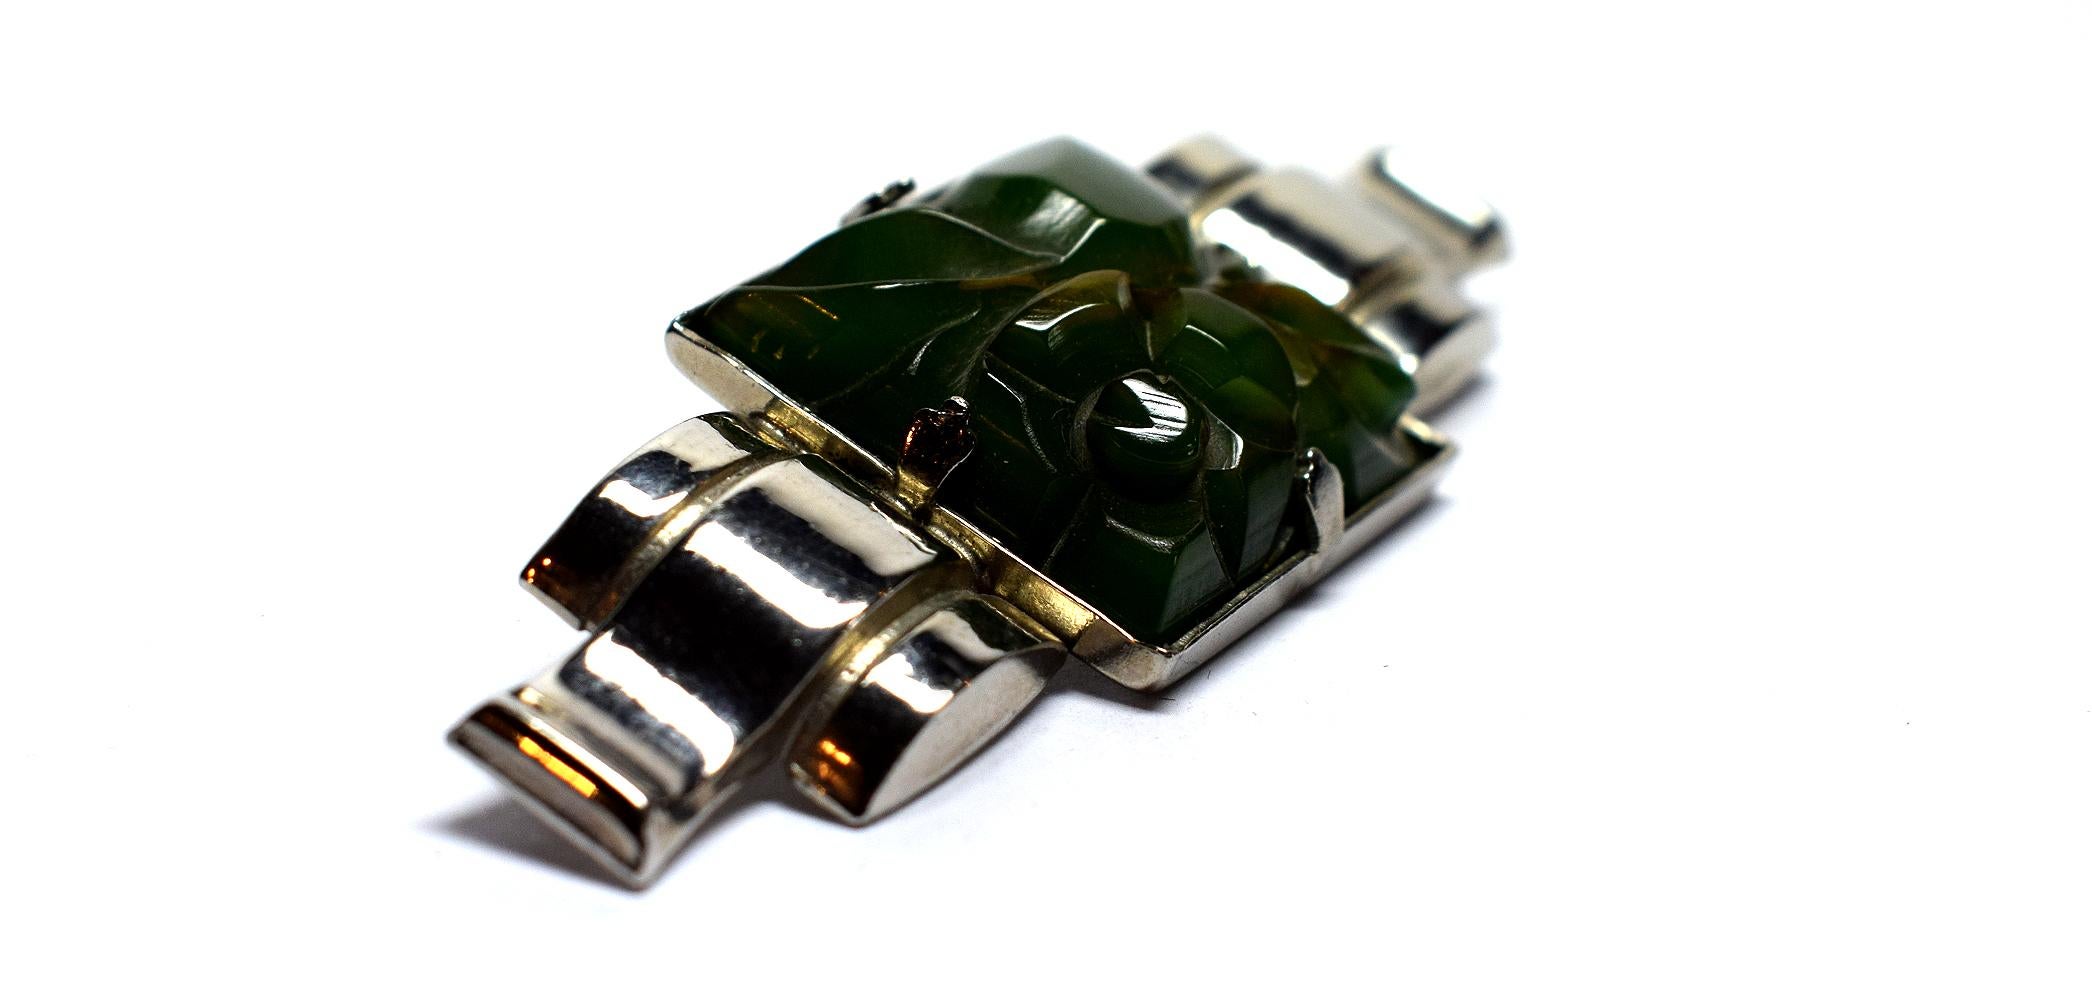 Very attractive ladies Art Deco brooch, totally authentic and to the period, dating to the 1930's. Features an emerald green phenolic Bakelite carved floral center piece which is mounted on a chrome serpentine back plate. The whole brooch is in